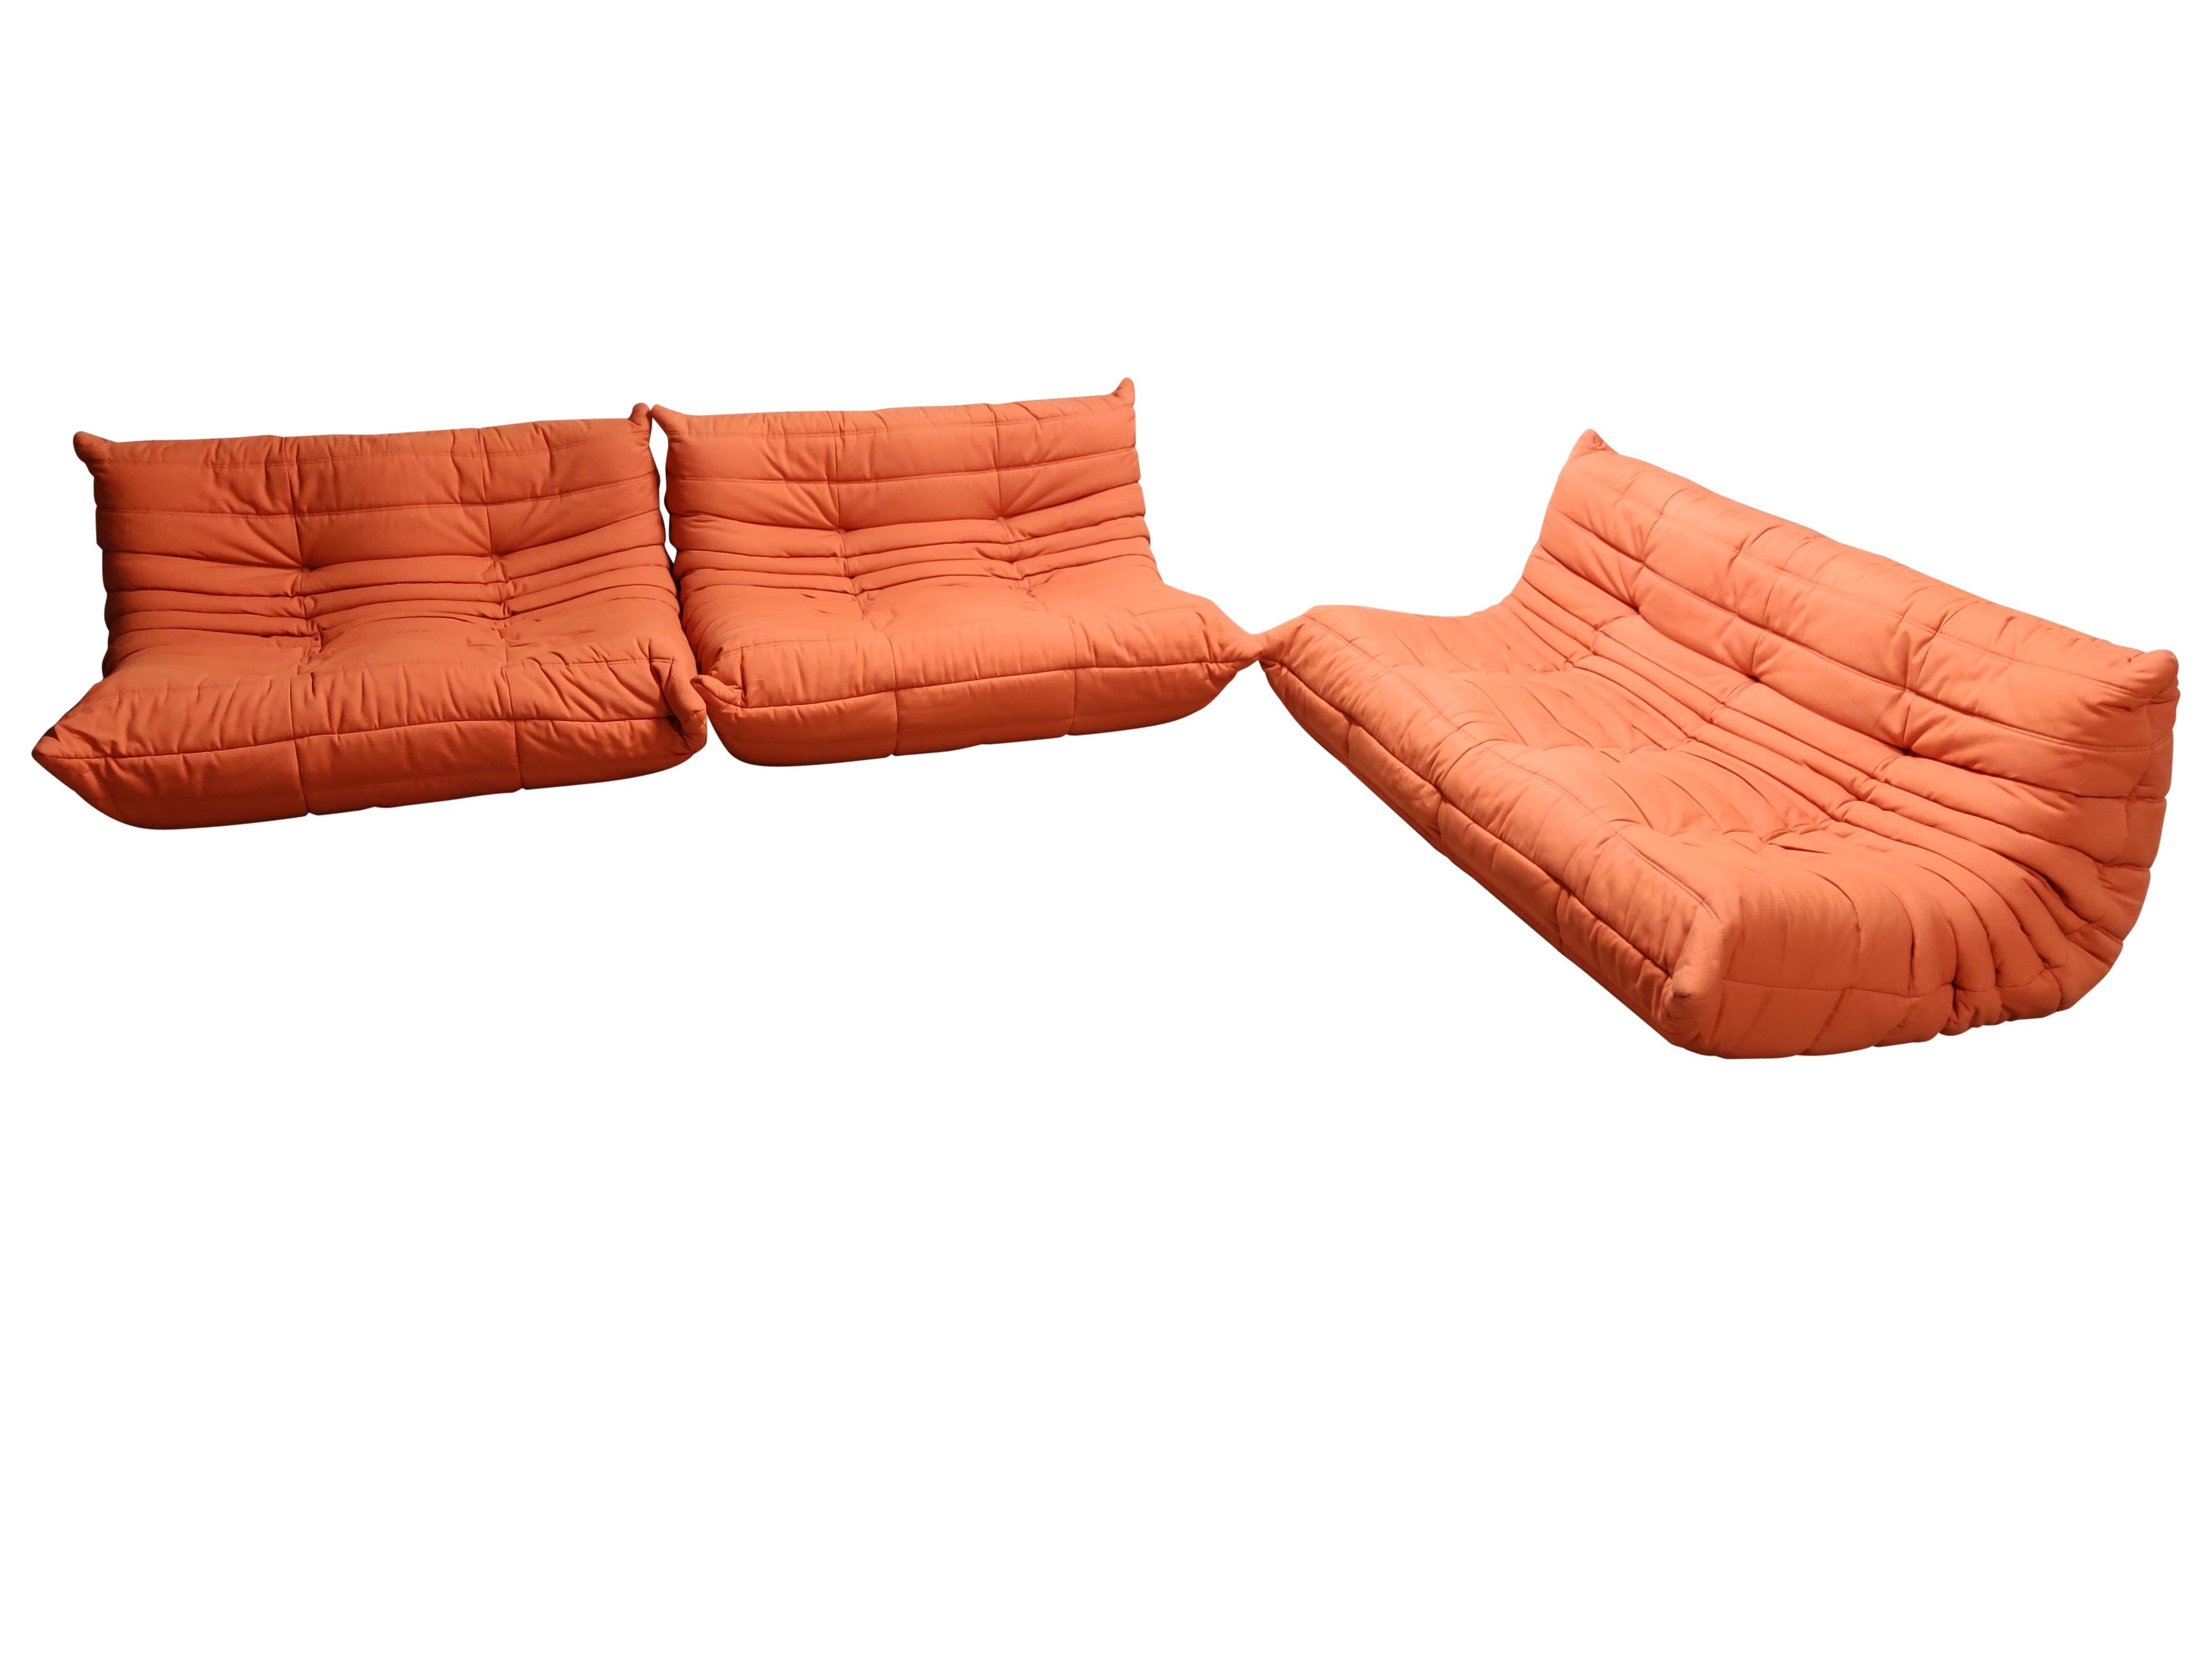 The iconic Togo sofa, originally designed by Michael Ducaroy for Ligne Roset in 1973, has become a design Classic.

This set consists of one three-seat and two-seat modules.

Very good condition.

Made completely from foam, with three